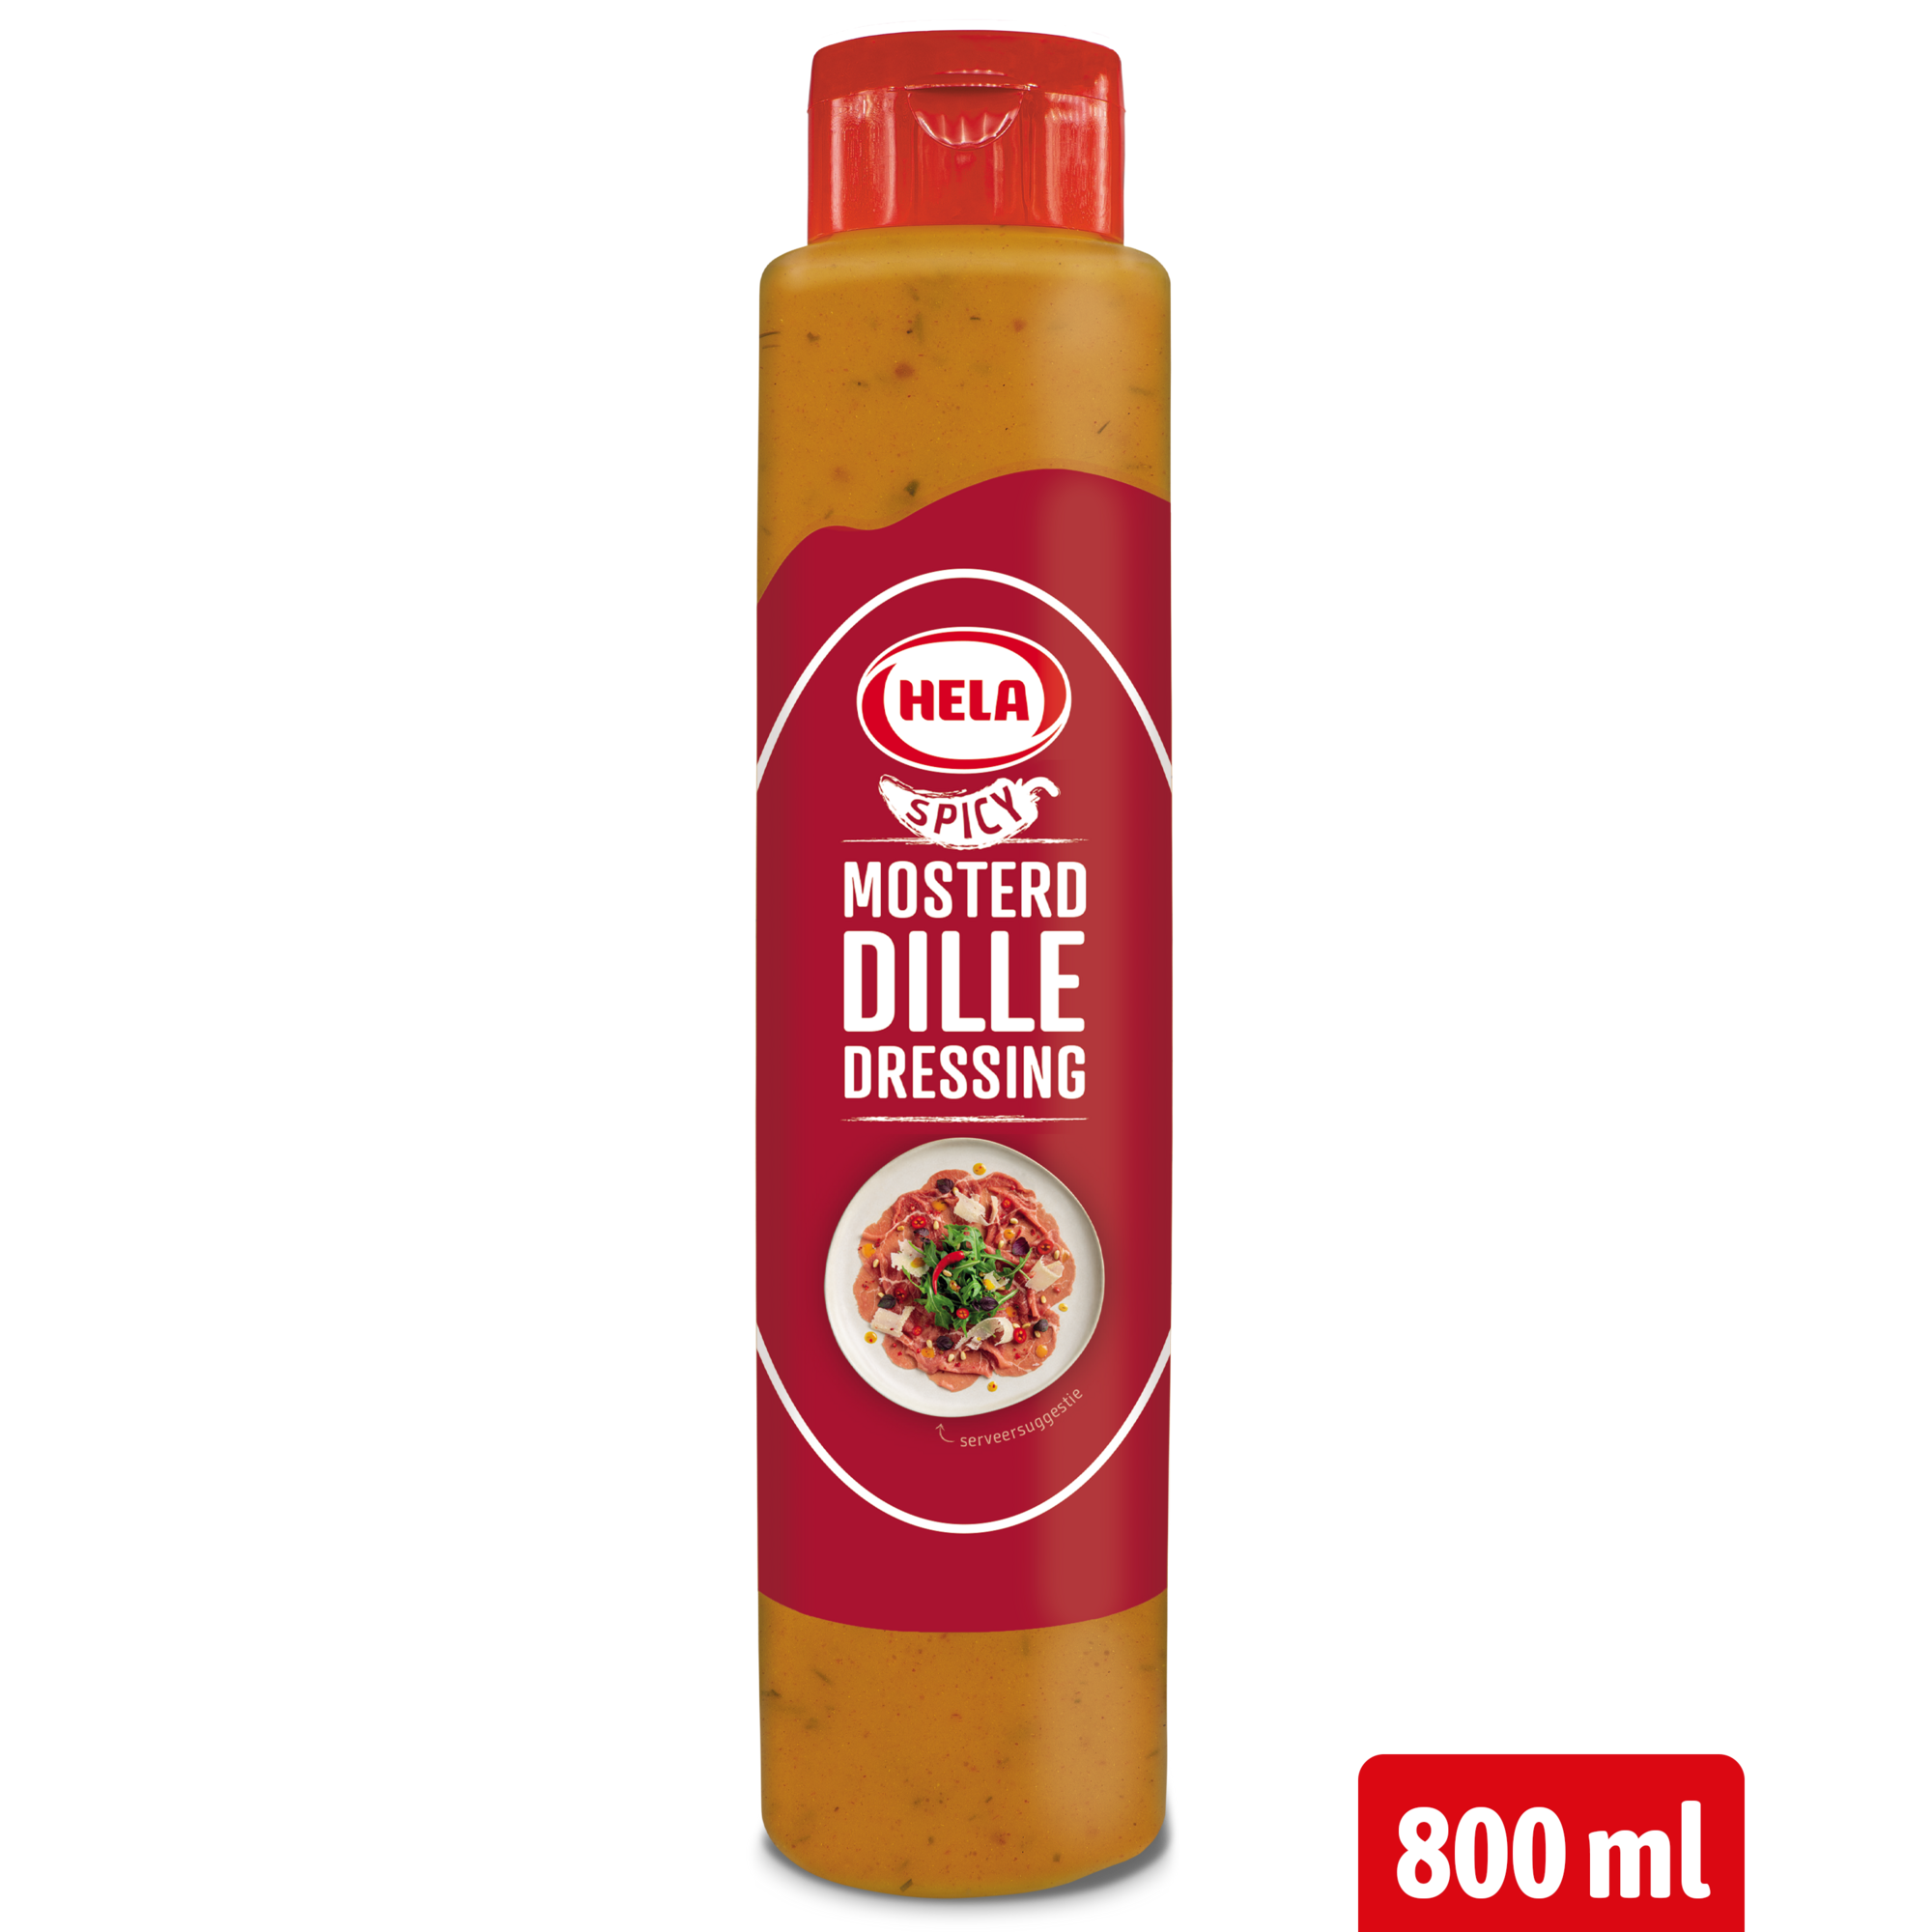 77706 Spicy mosterd dille dressing 800 ml